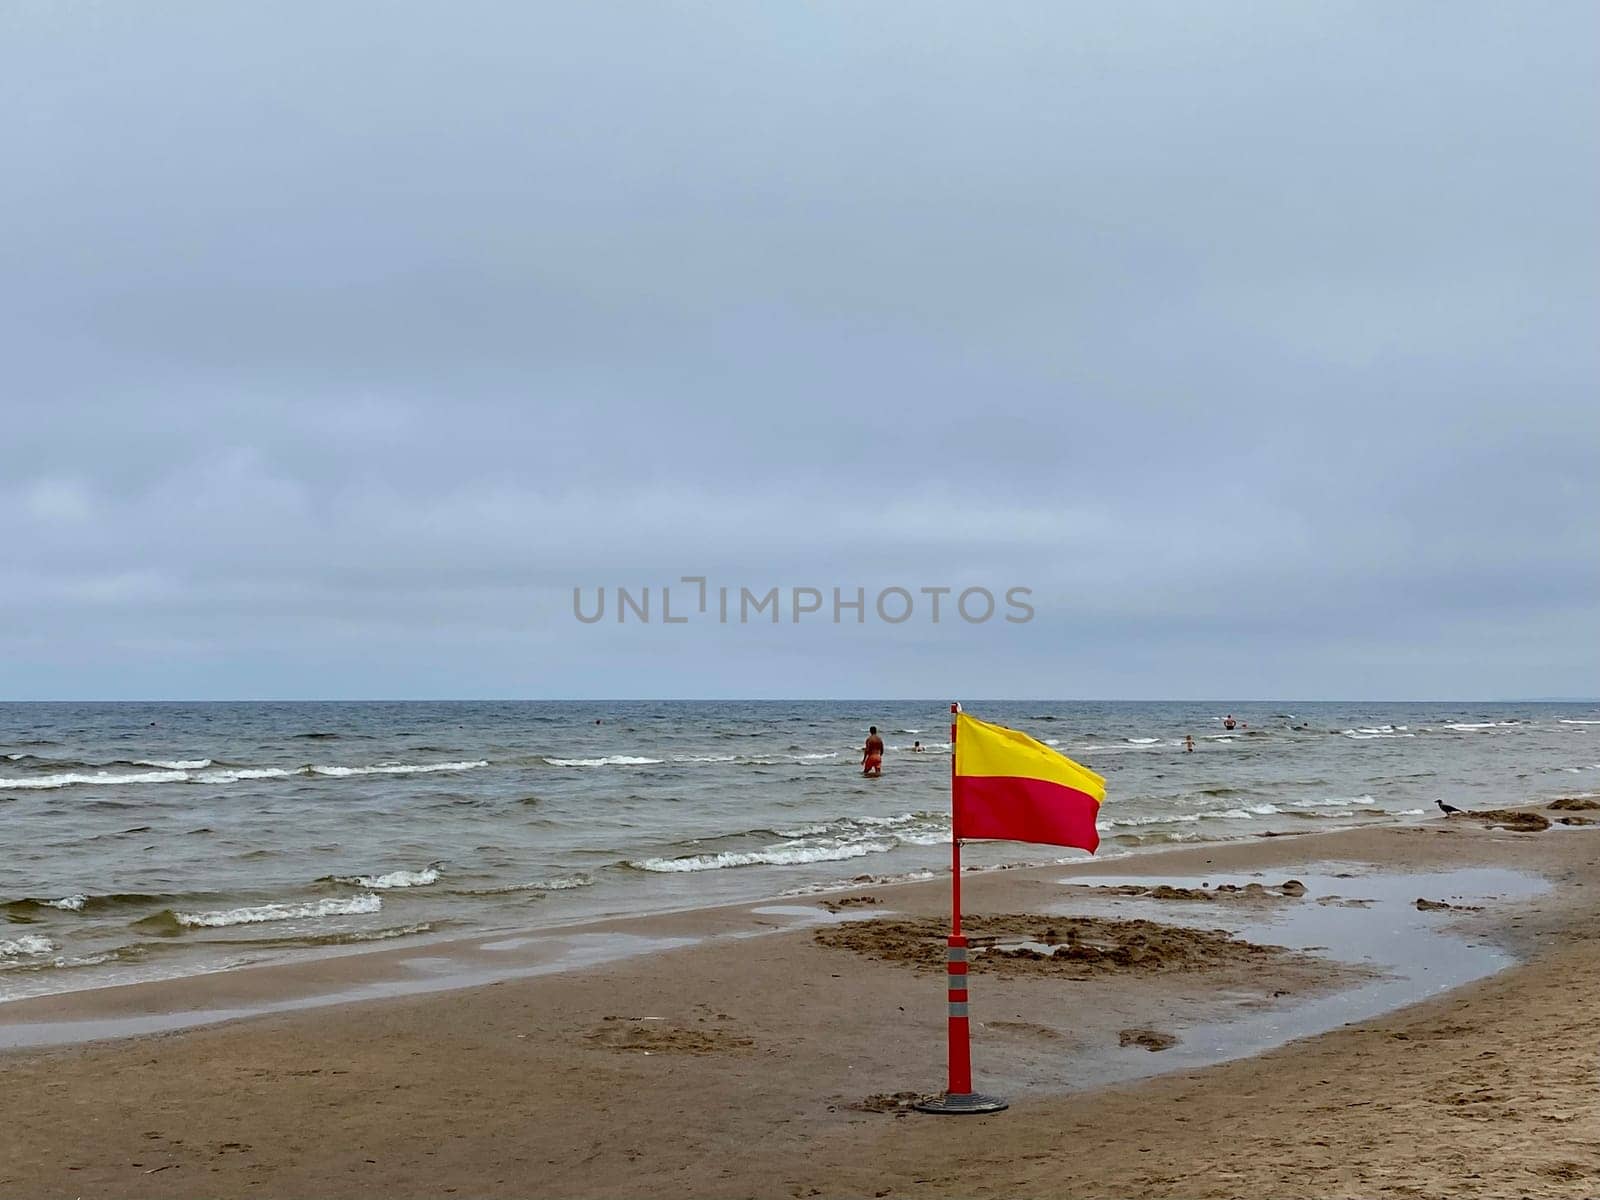 A Yellow and red beach flag, warning flag, lifesaving surf flag, rainy day in the beach, beach storm attention. High quality photo